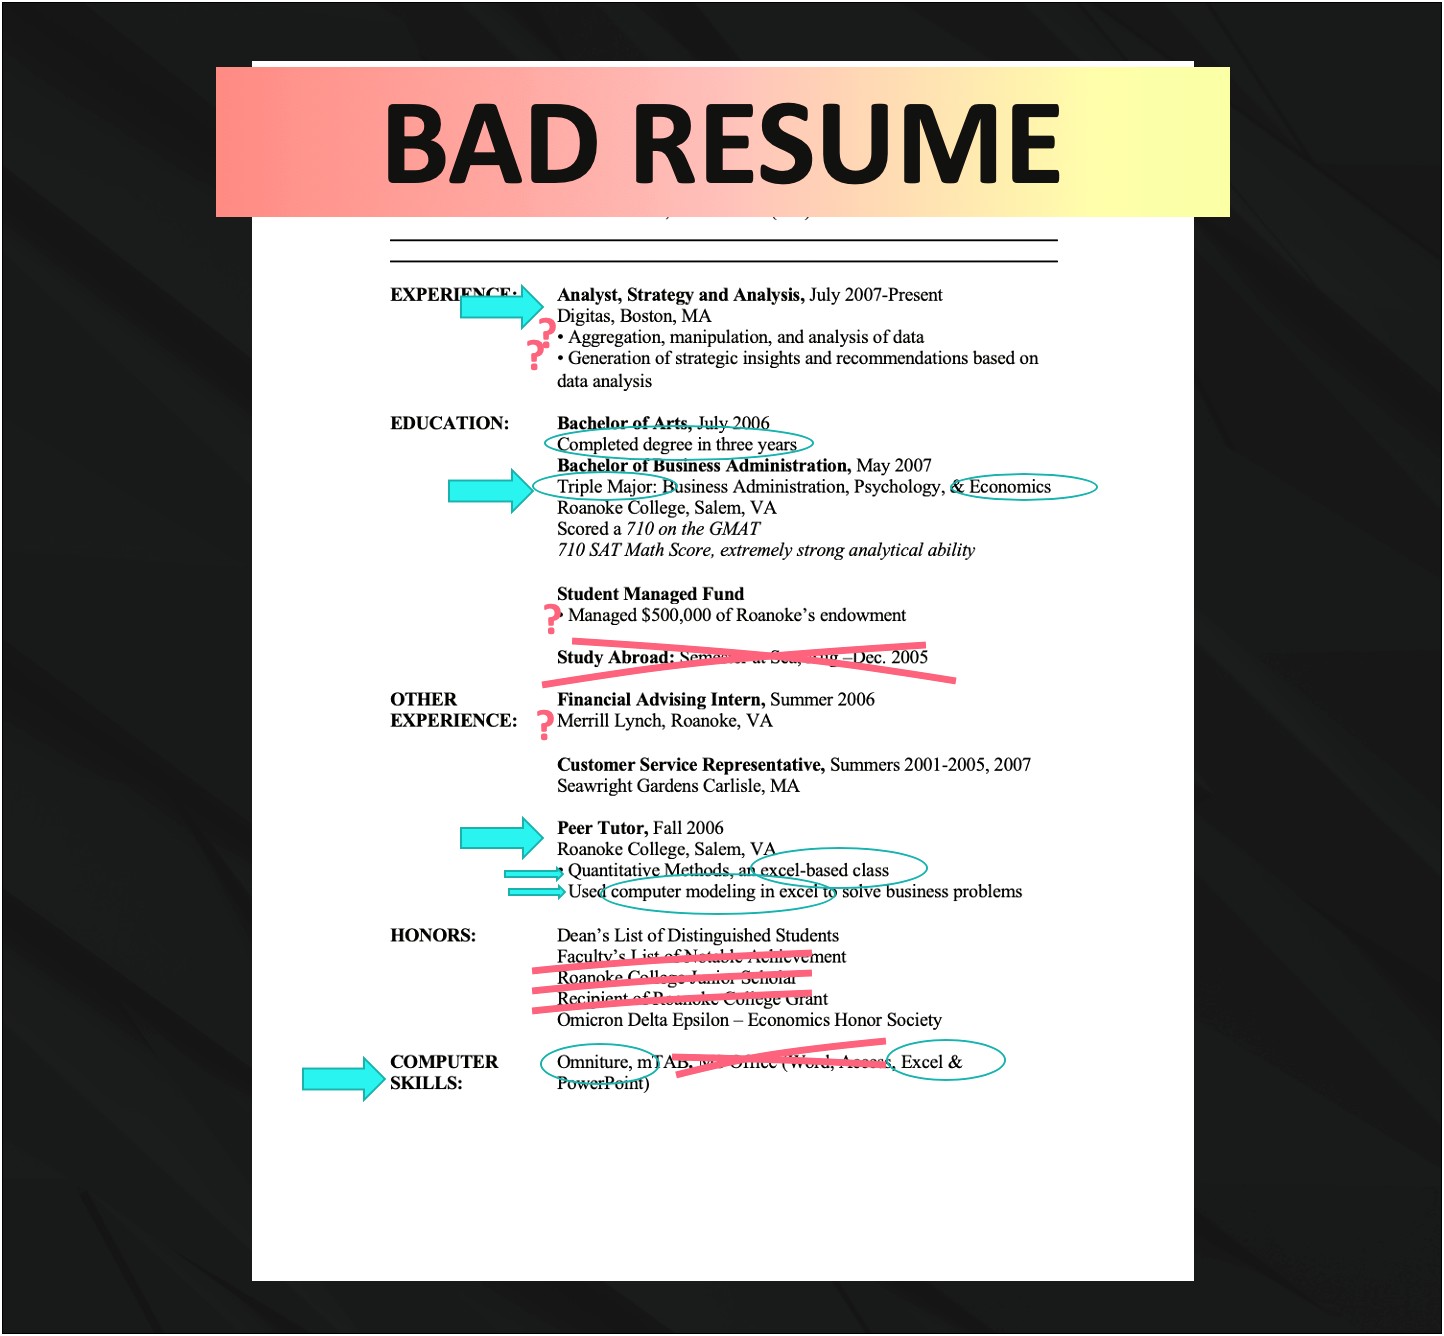 Technical Analyst Summary Of Qualifications Resume